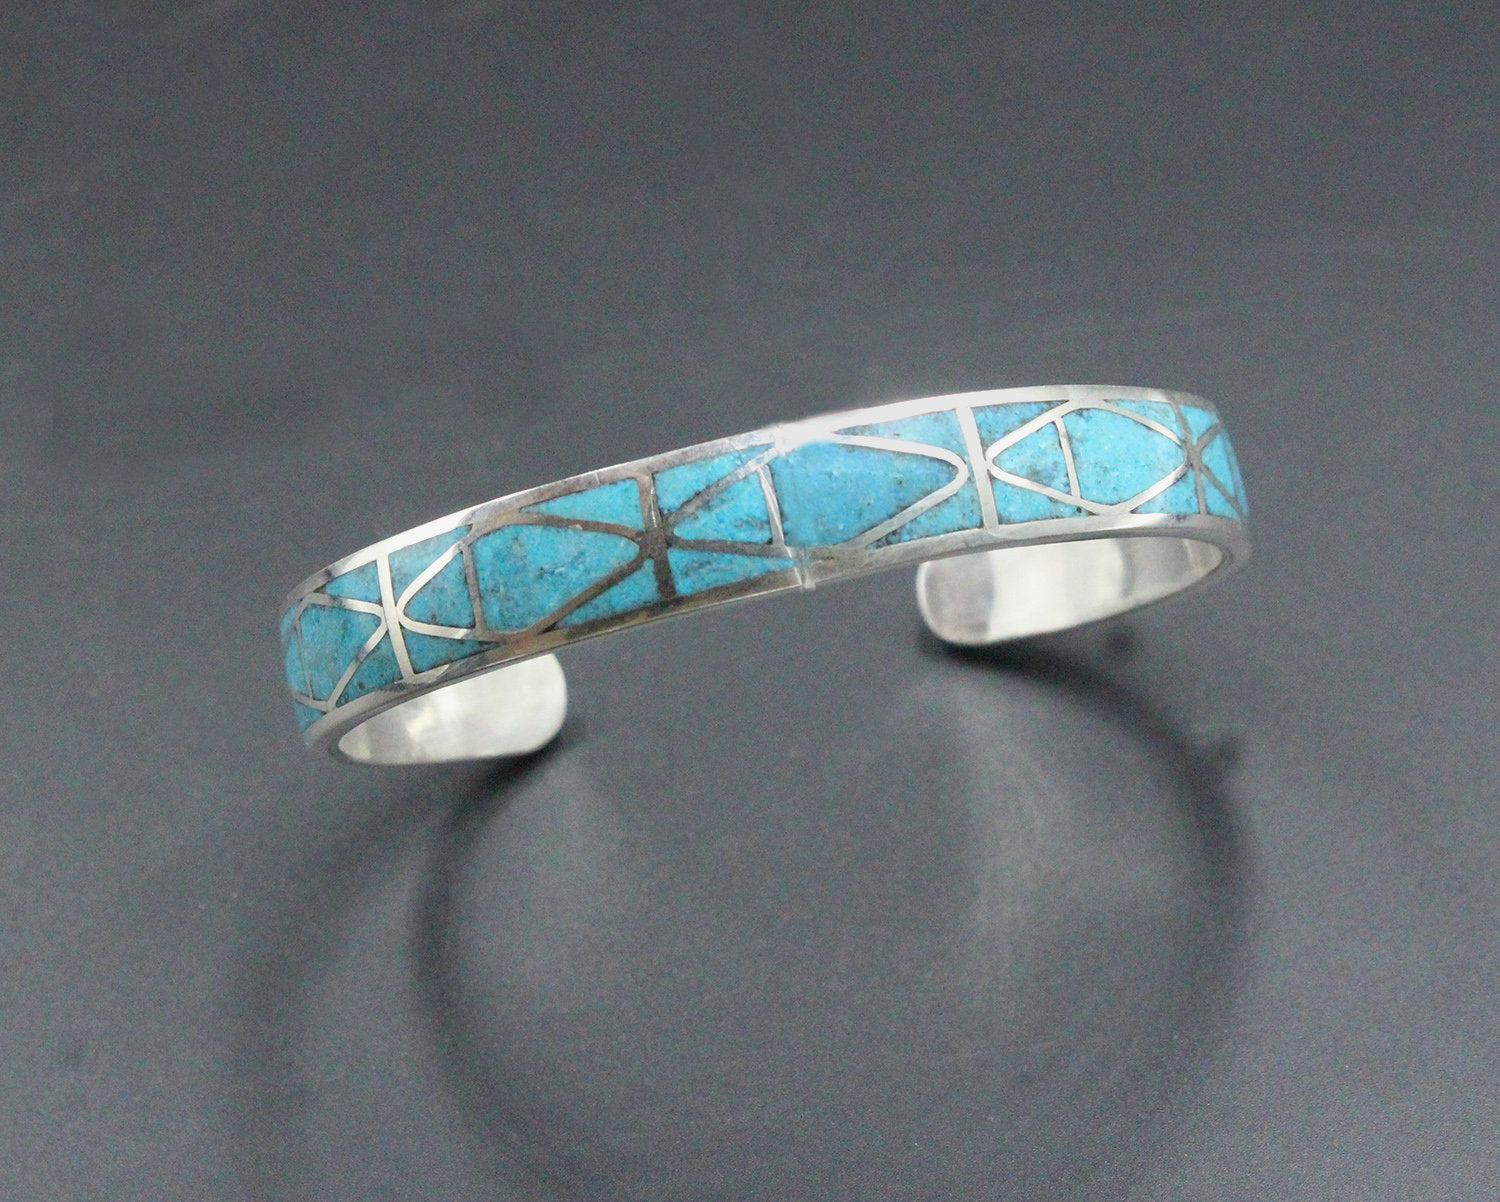 Turquoise and Sterling Silver Cuff Bracelet, Silver Cuff Bracelet